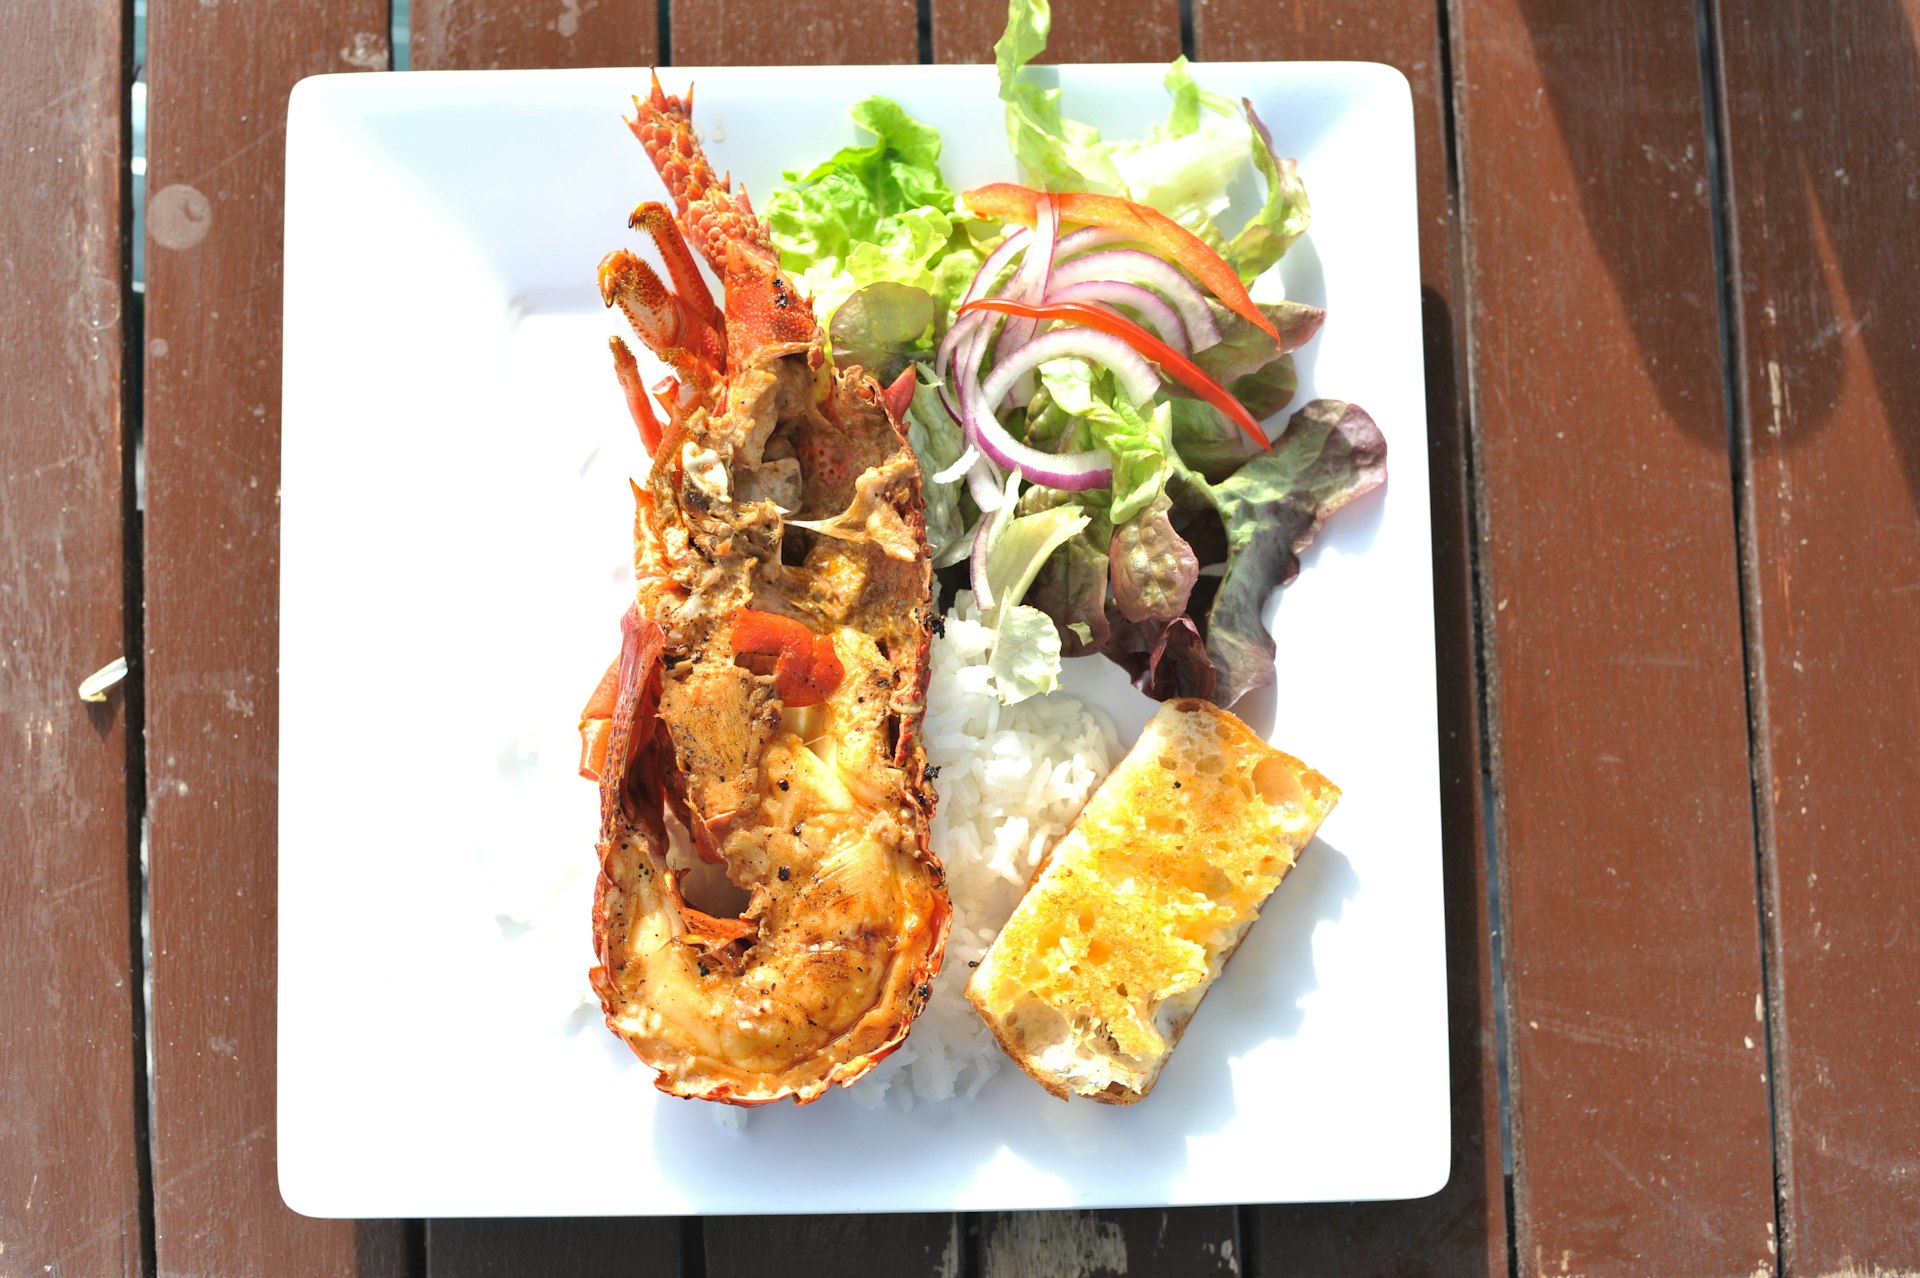 Grilled crayfish with rice and bread served at Kaikoura